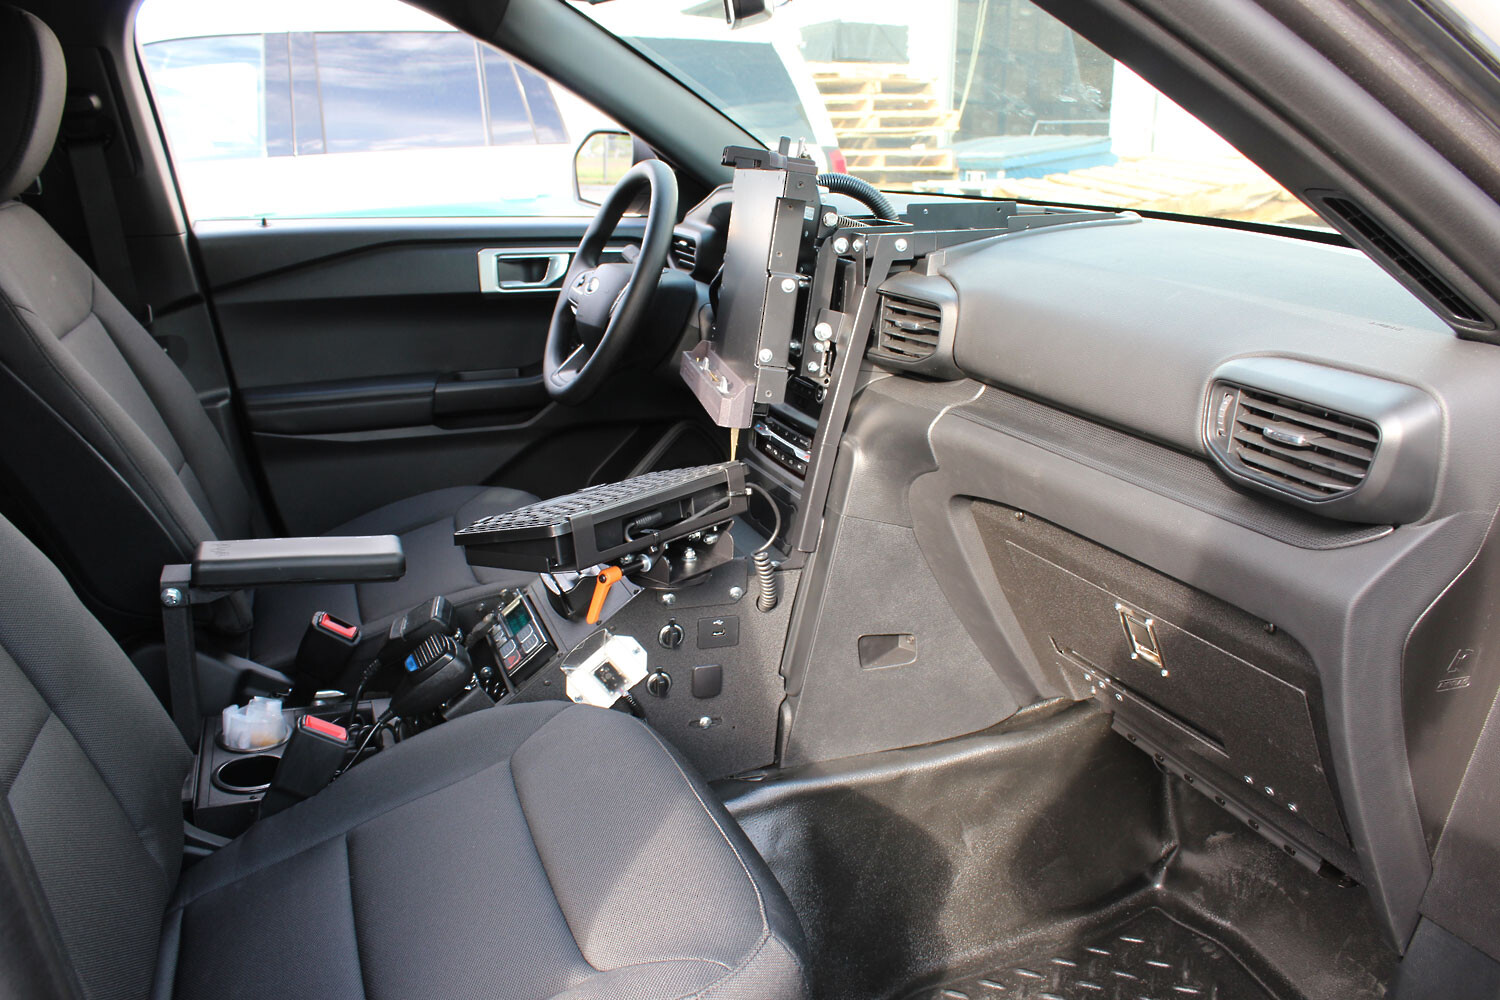 Interceptor Utility Console - D and R Electronics